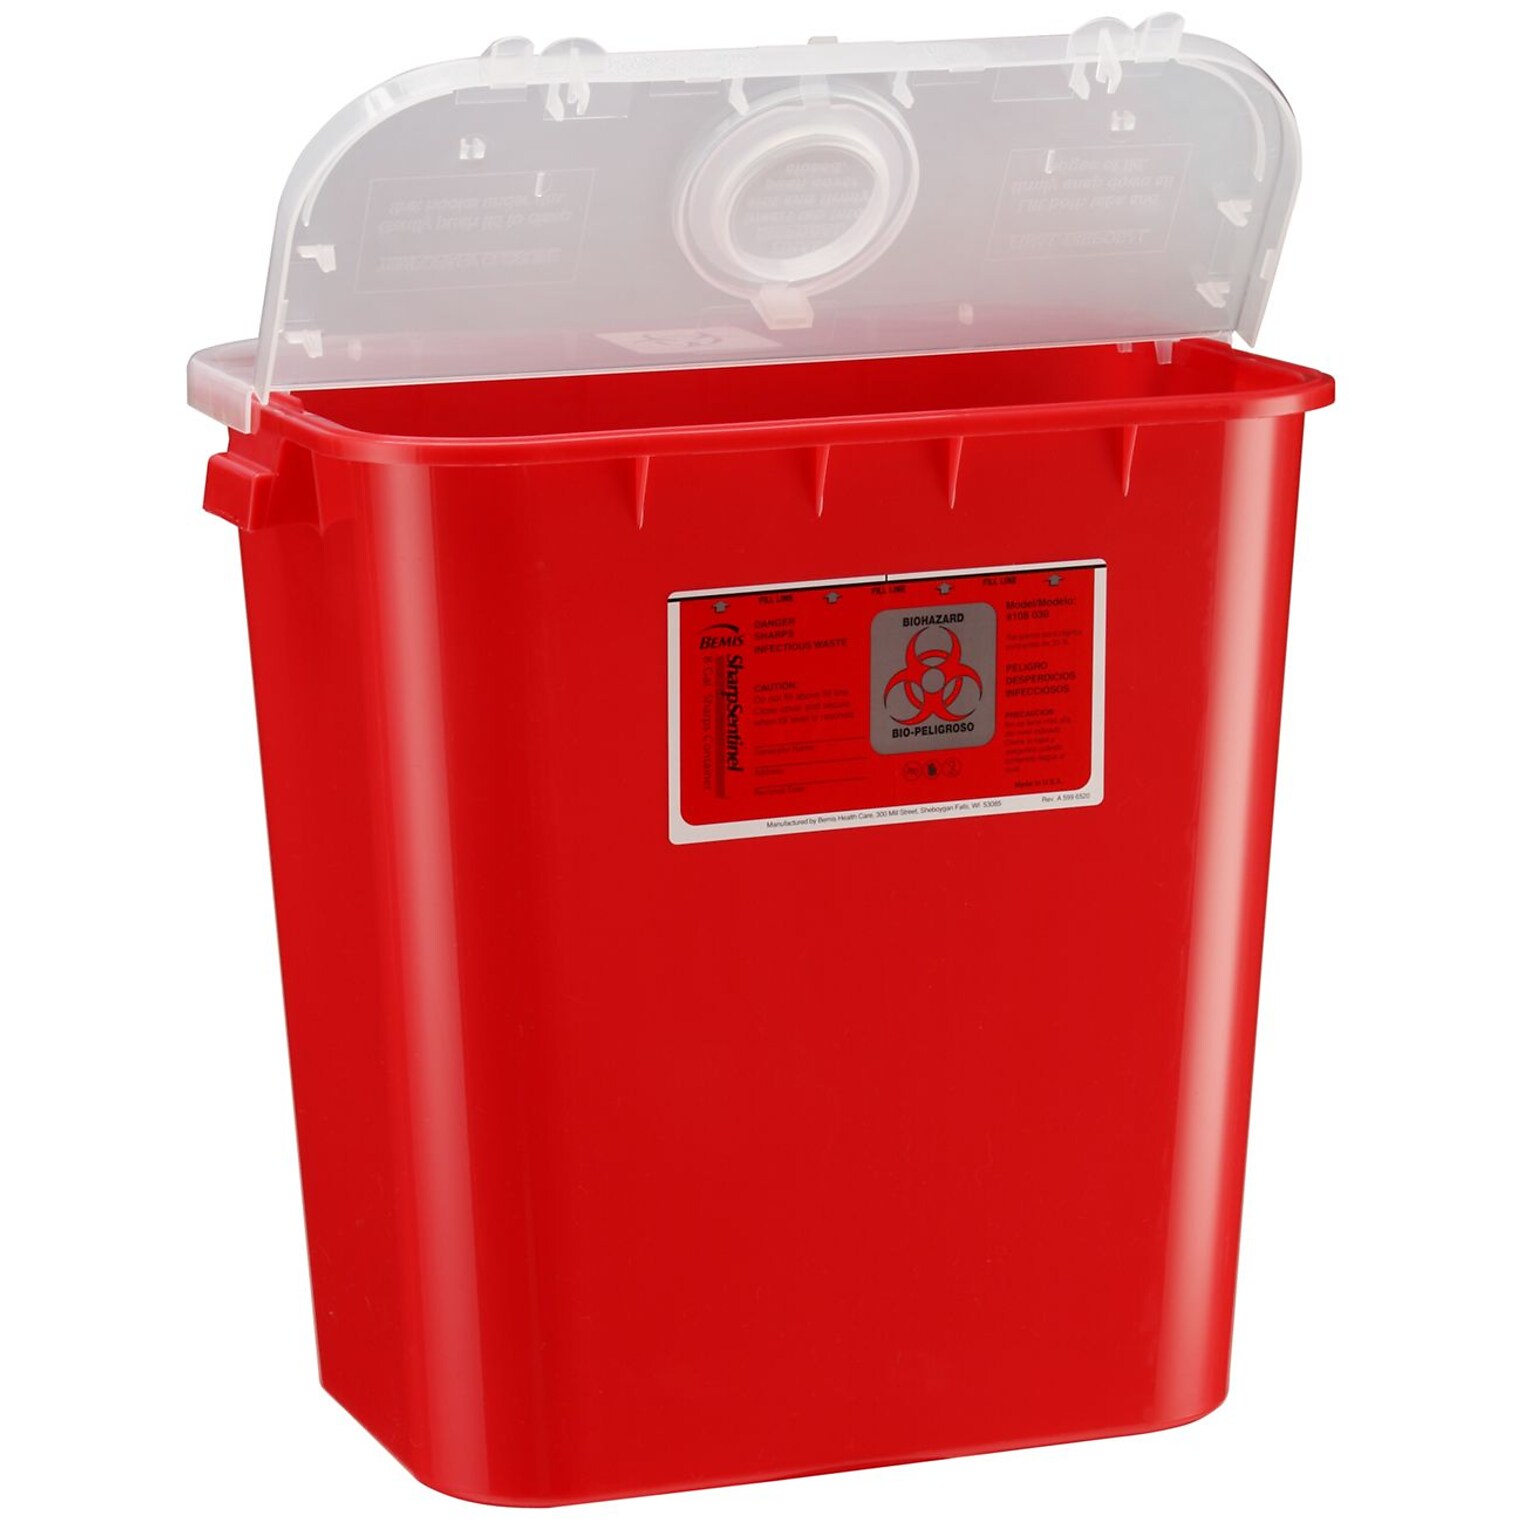 Bemis Sharps Container, 8 Gallon, Red, 10 Pack (108030-10)